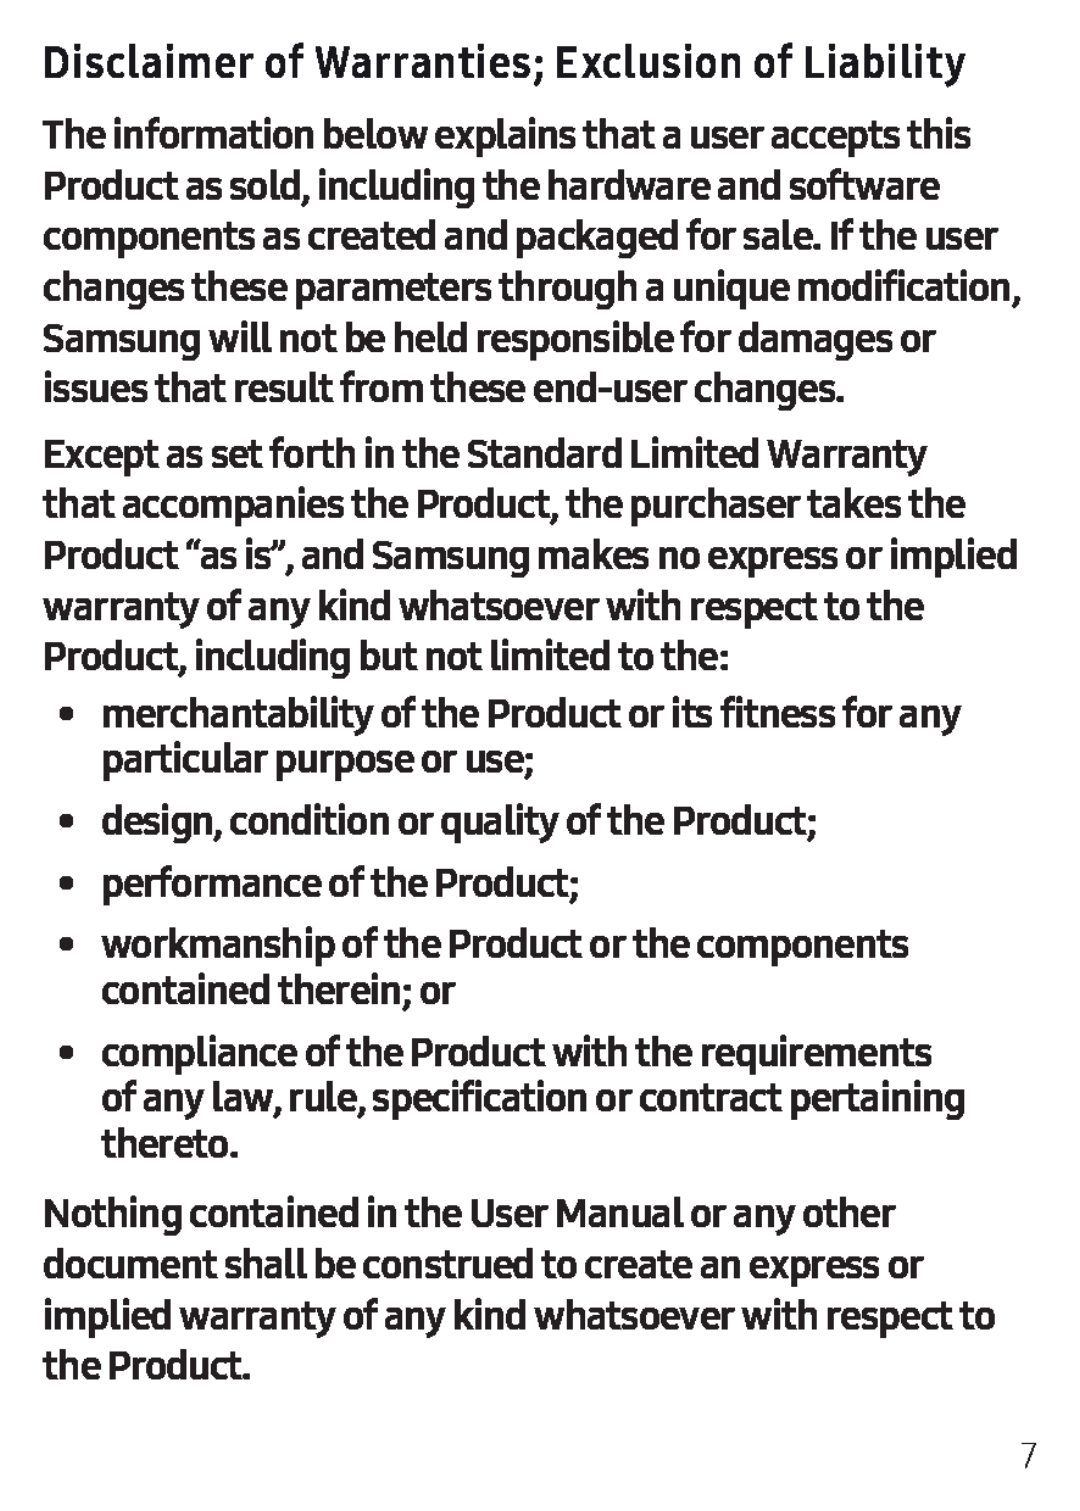 Disclaimer of Warranties; Exclusion of Liability Galaxy Tab E 8.0 US Cellular